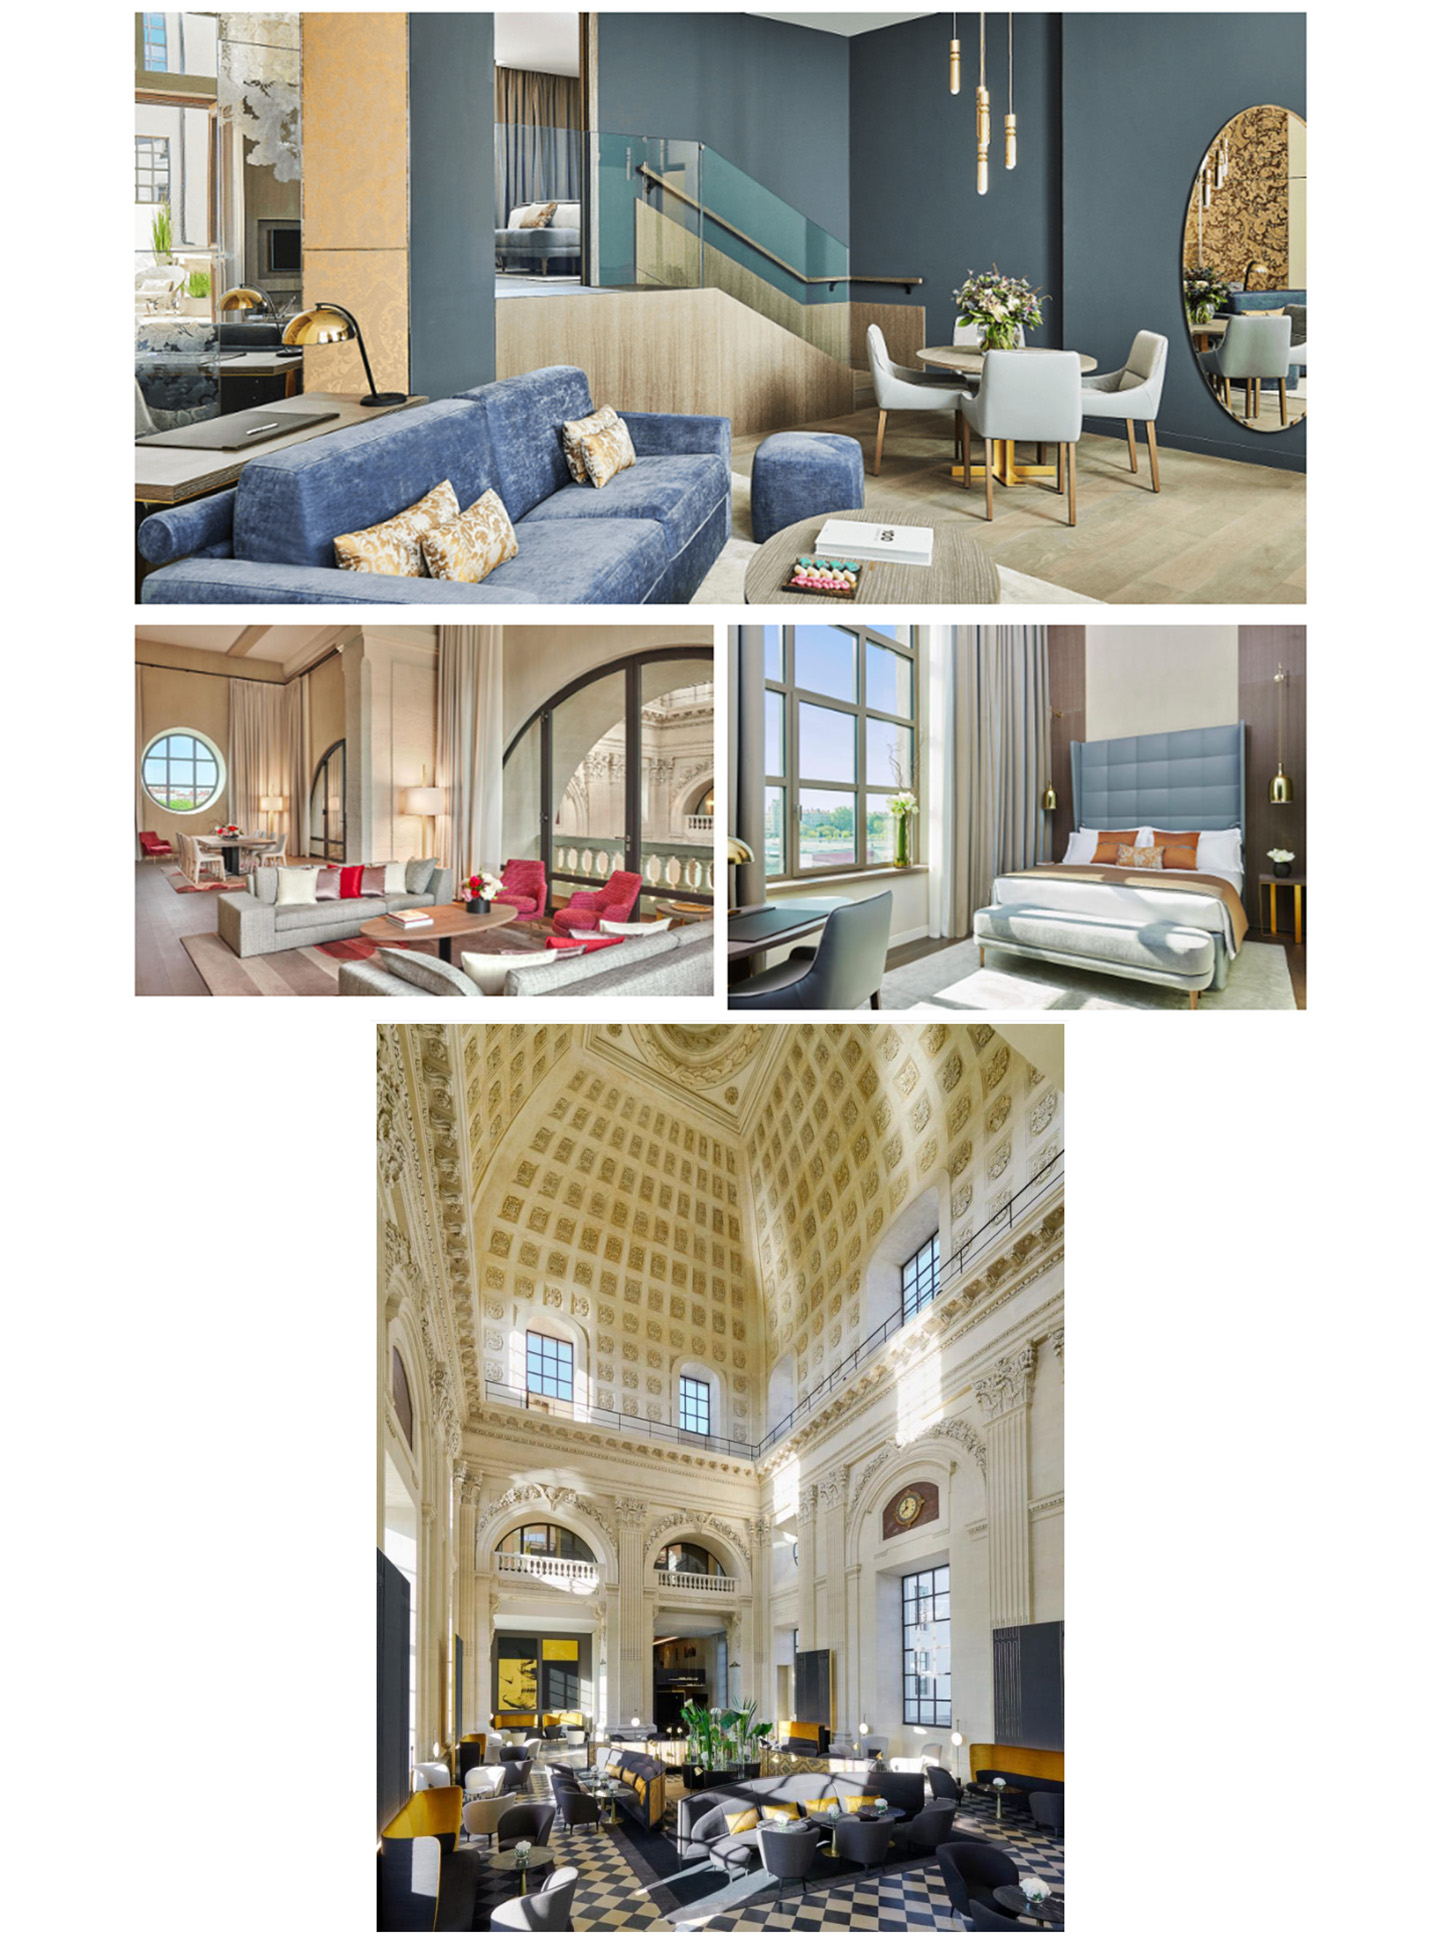 Article on the InterContinental Lyon Hotel Dieu realized by the studio jean-Philippe Nuel in the magazine Luxury travel, new luxury hotel, luxury interior design, historical heritage